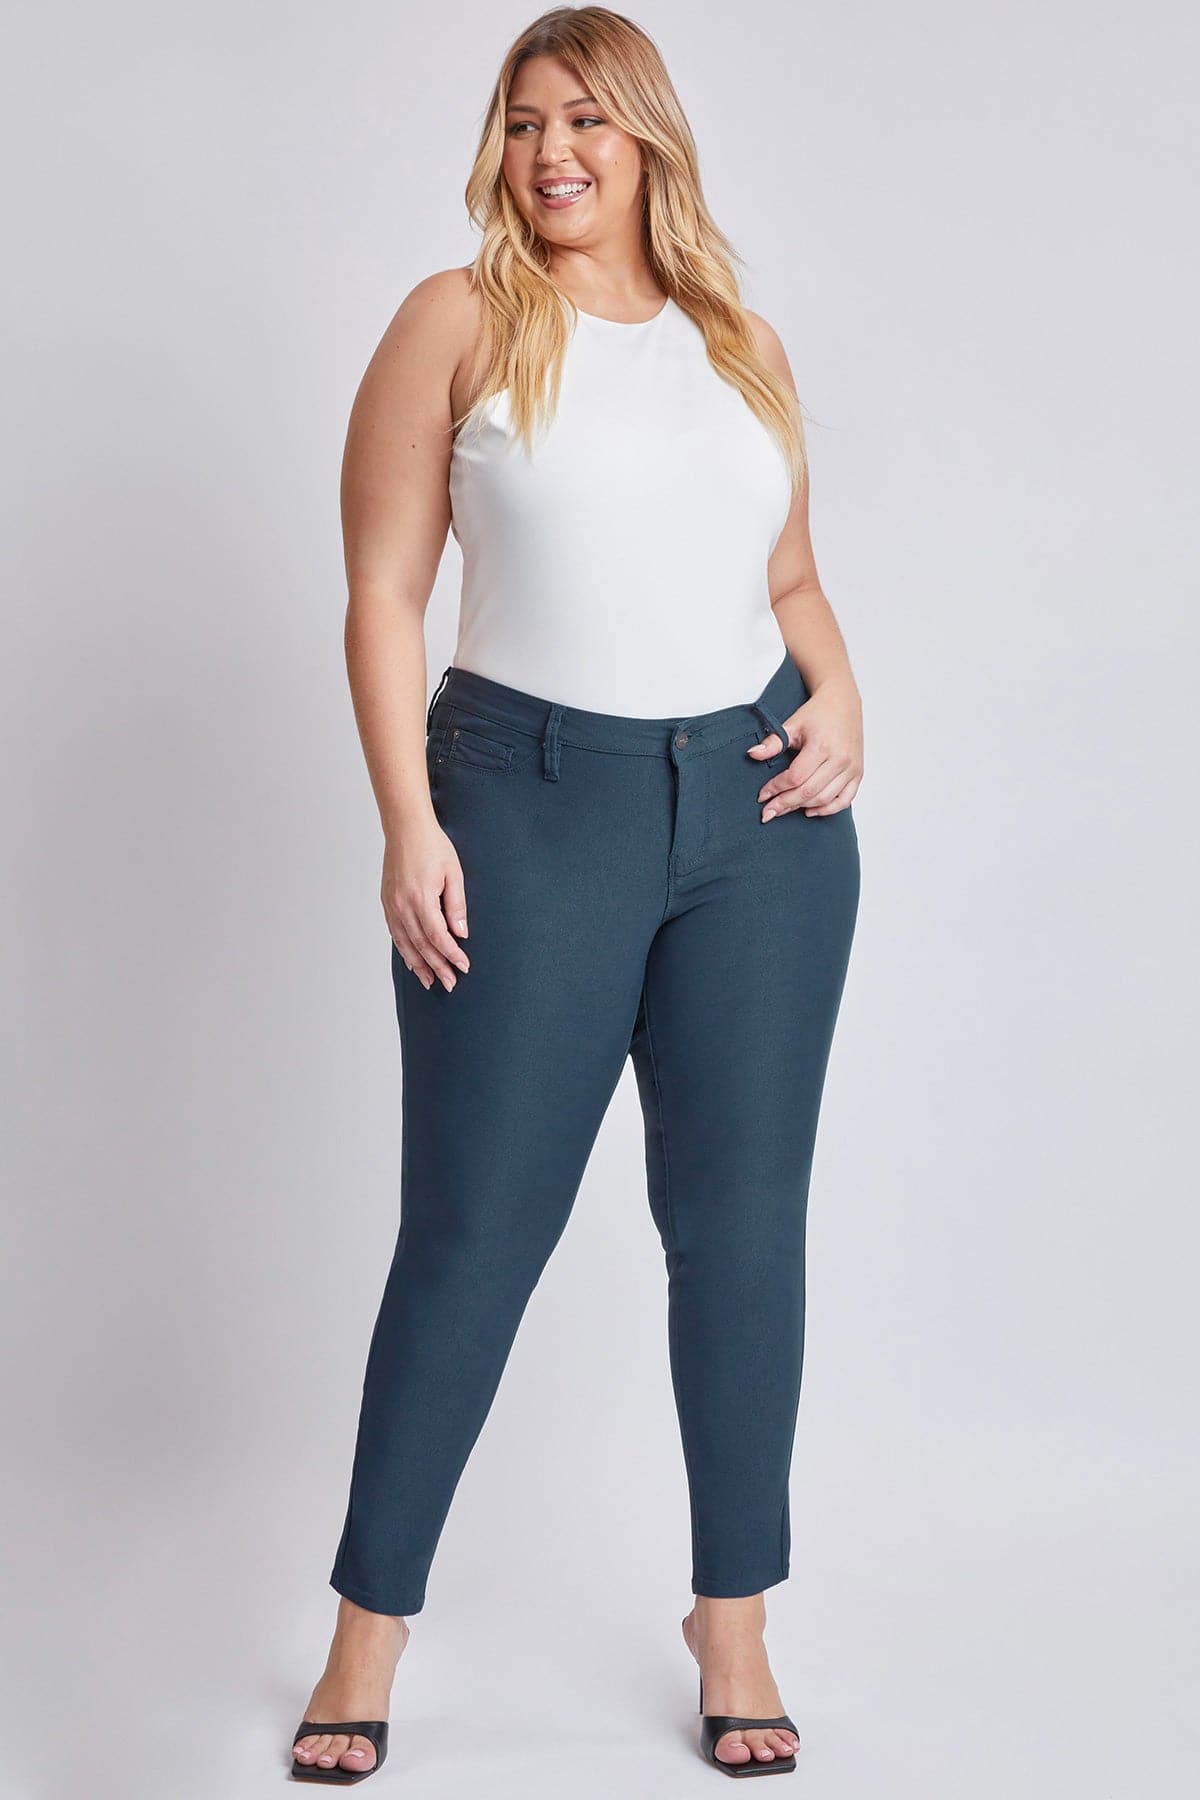 Women's Plus Size Hyperstretch Forever Color Skinny Pants